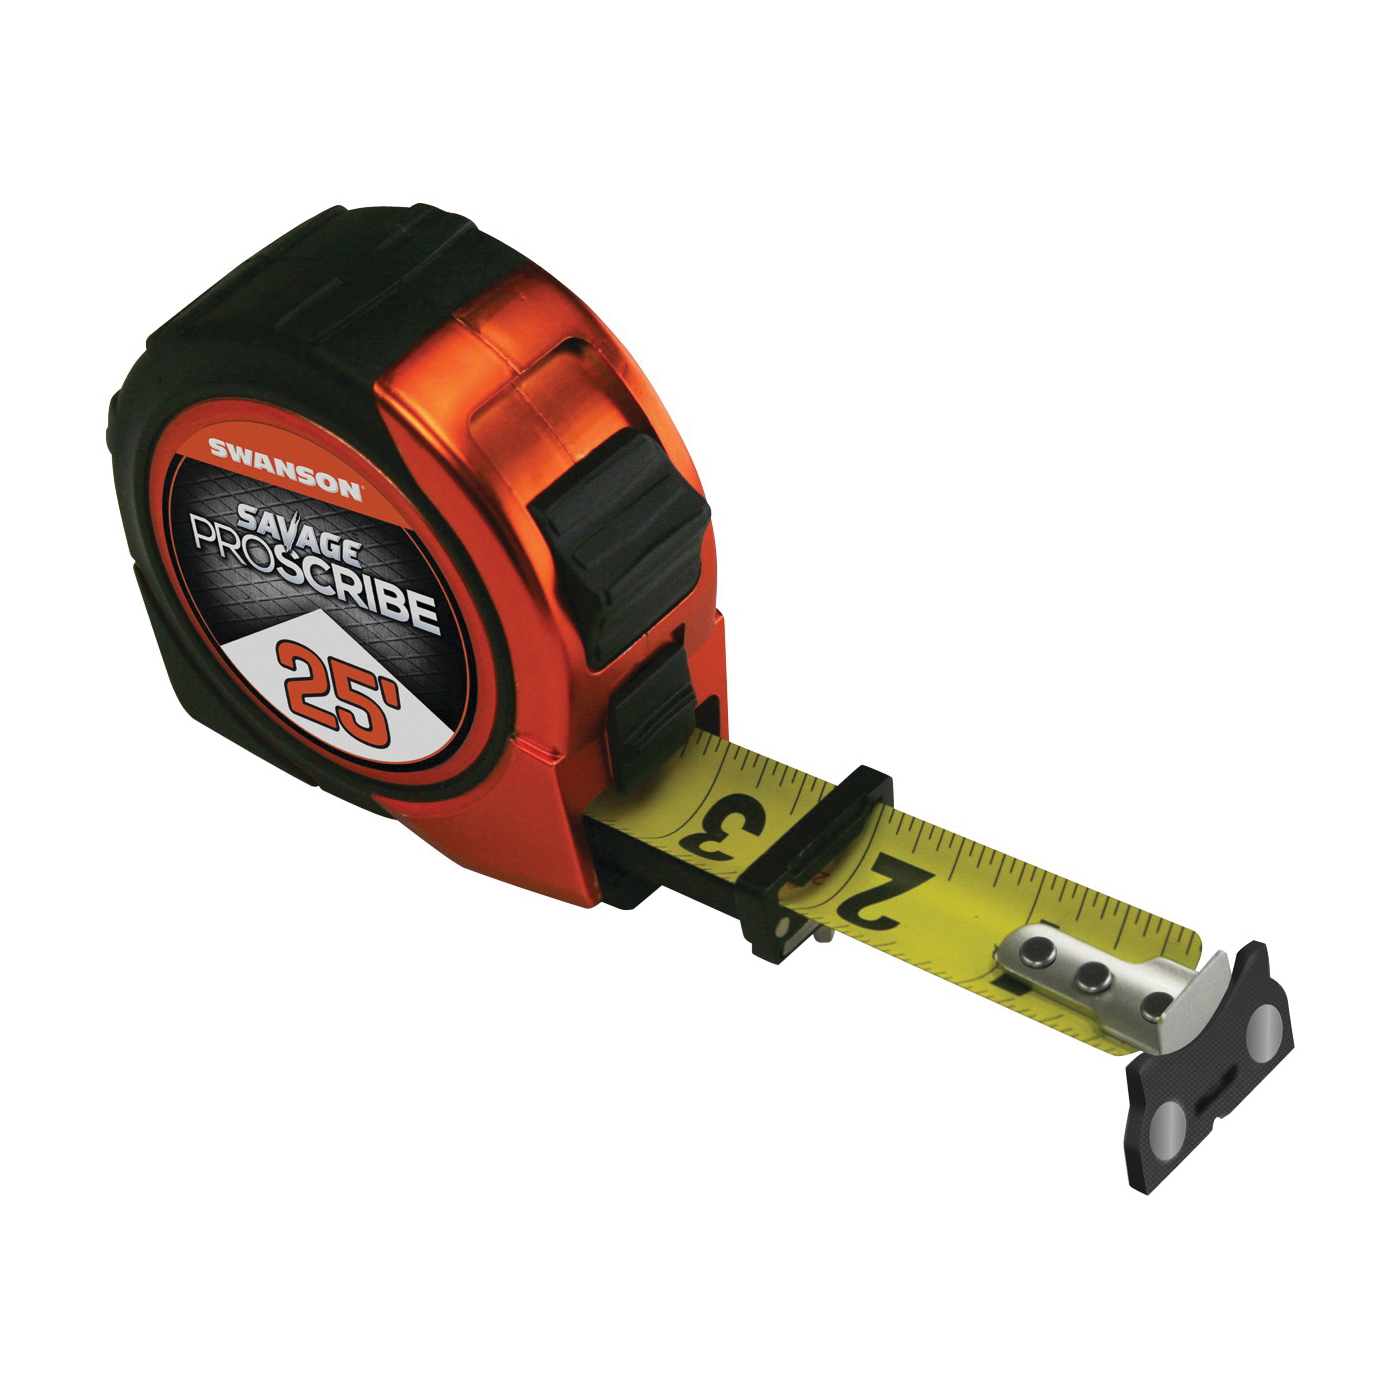 SAVAGE Series SVPS25M1 Tape Measure, 25 ft L Blade, 1 in W Blade, ABS/Rubber Case